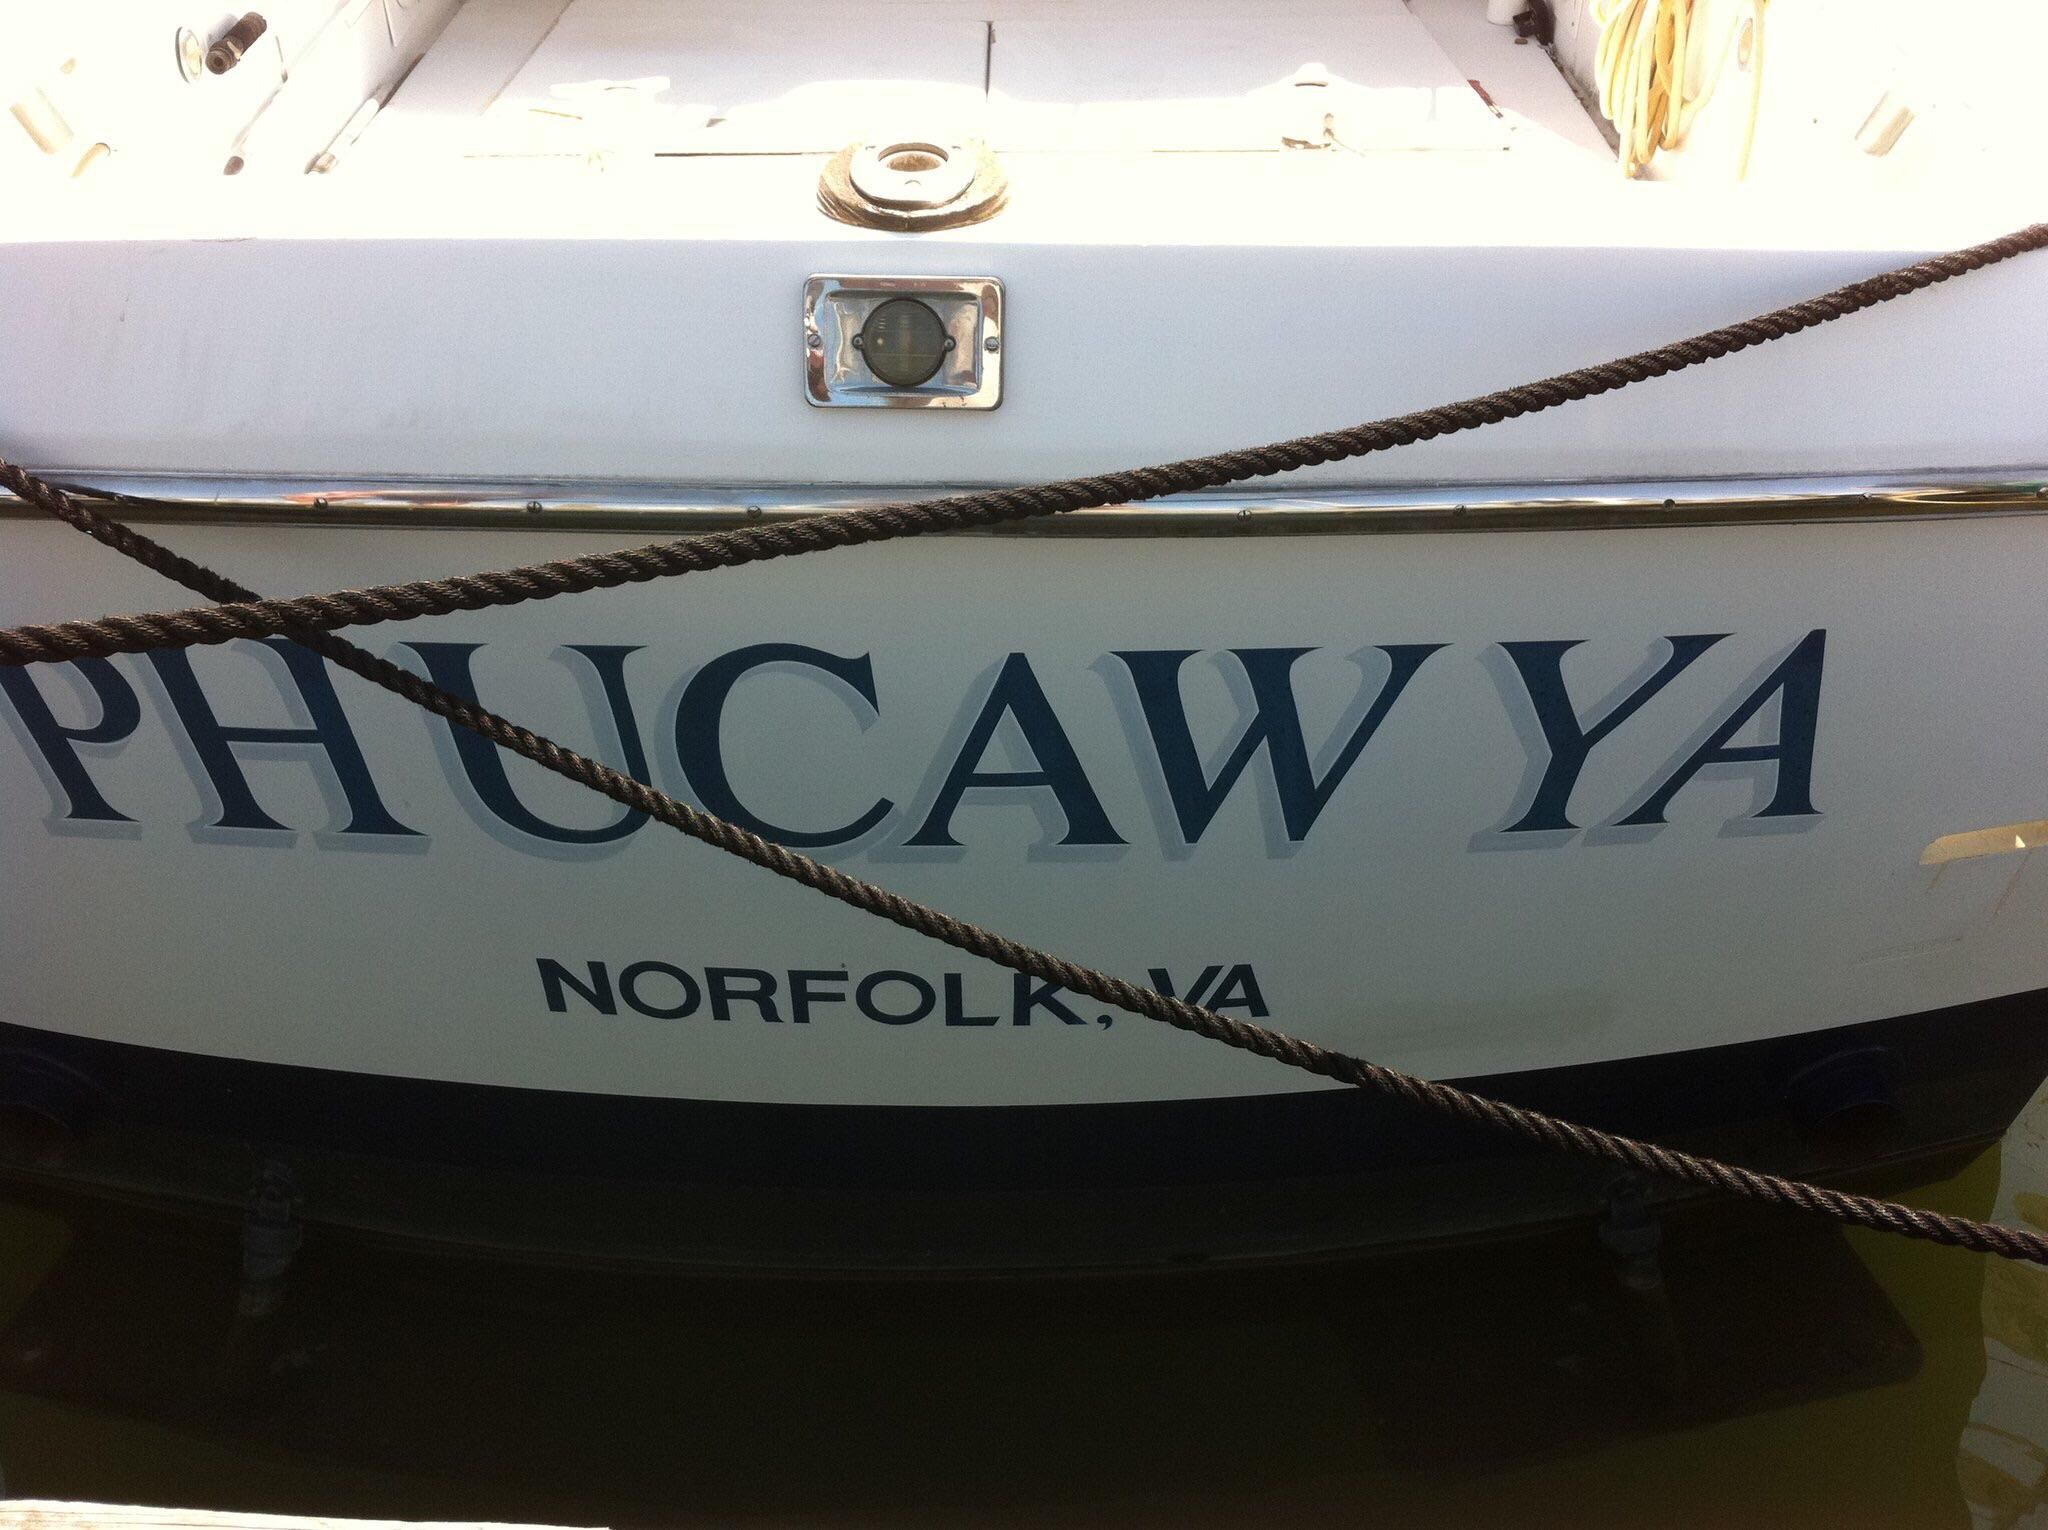 A local artist hand paints boat names, he does it for free if you let him name the boat. Here is one of his freebies.